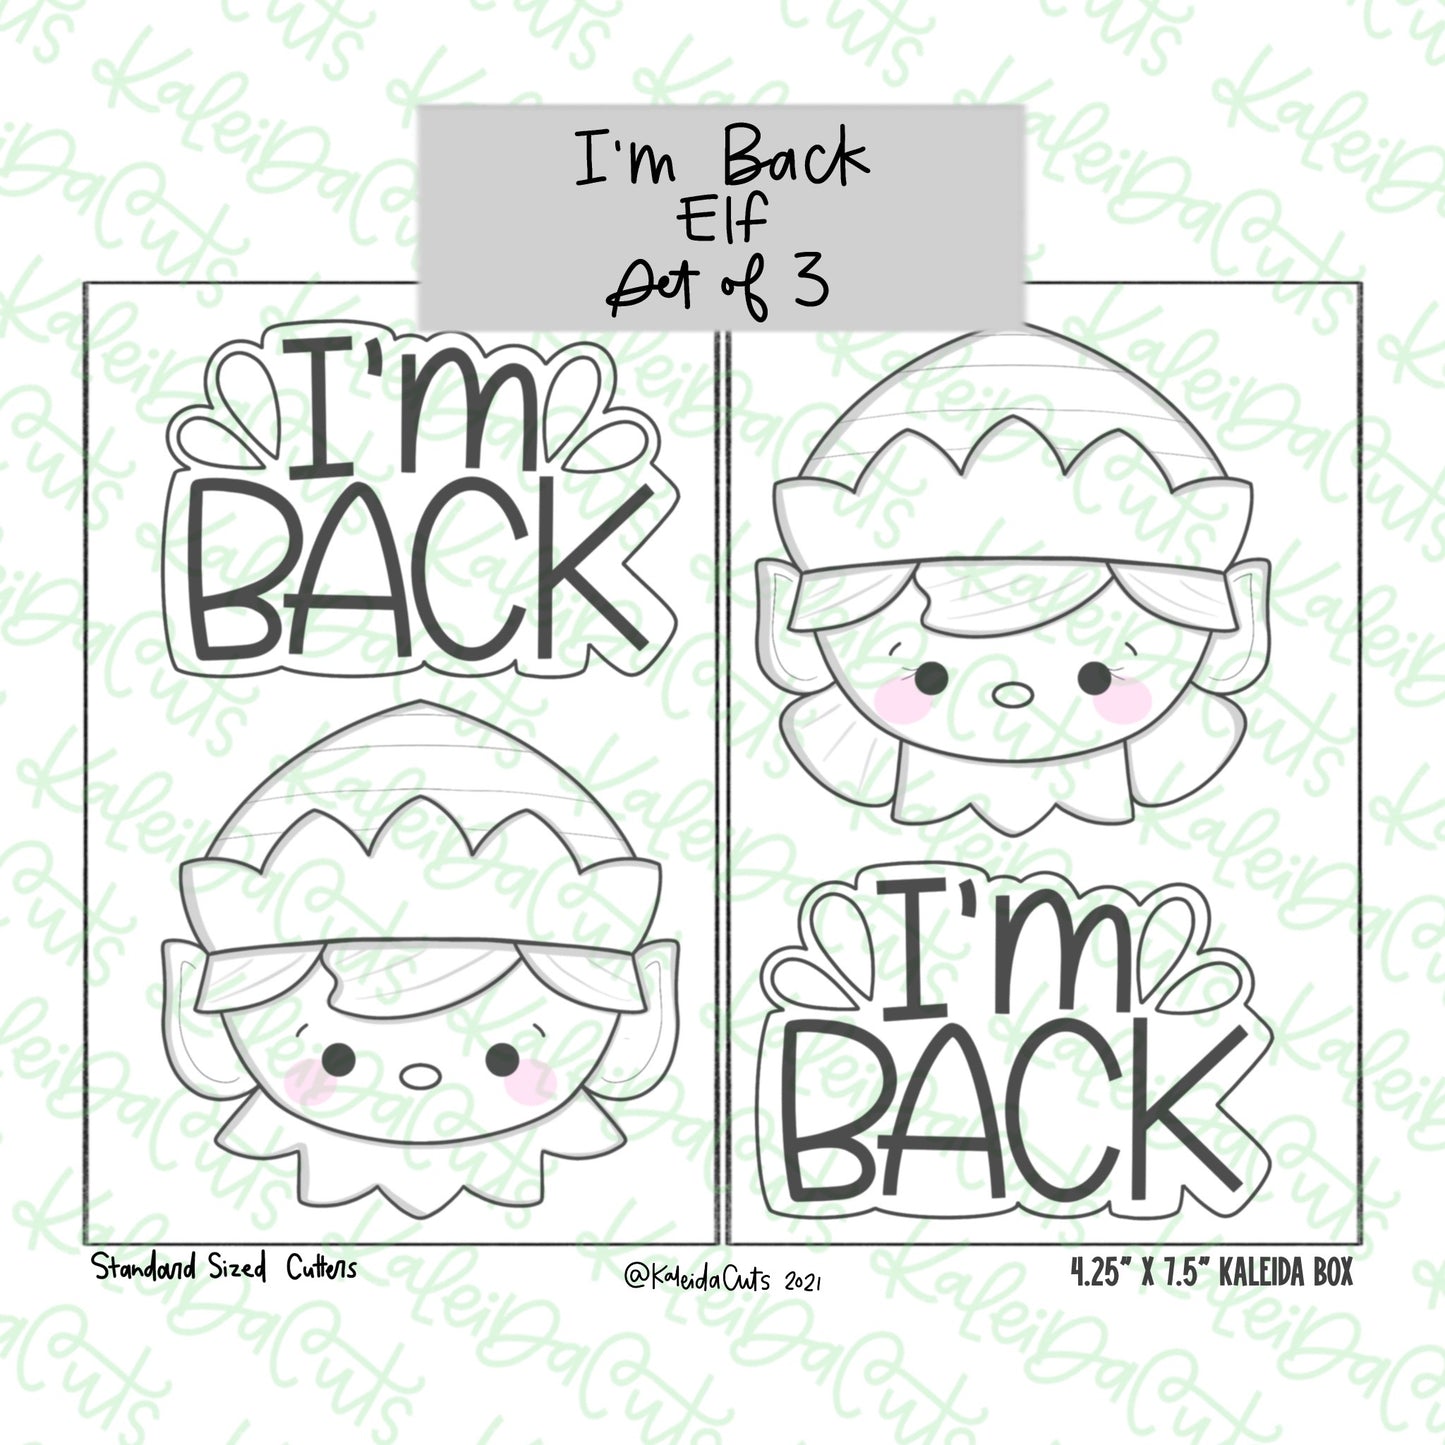 I'm Back Set of 3 Cookie Cutters